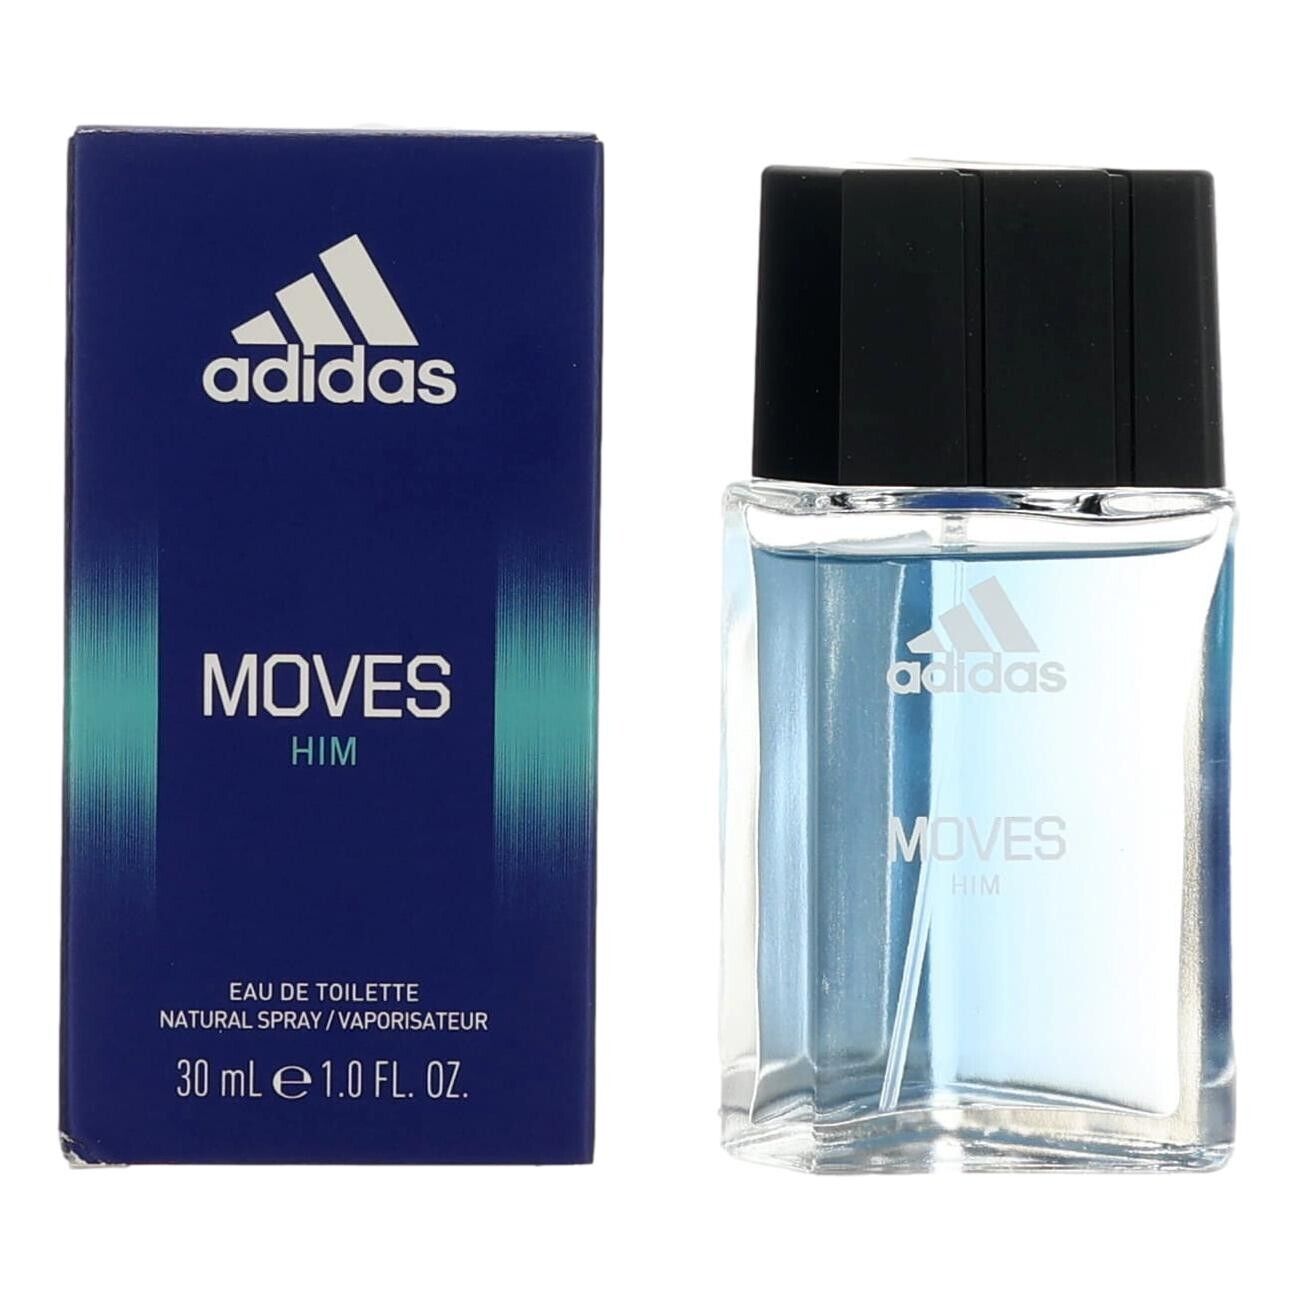 Adidas Moves by Adidas, 1 oz EDT Spray for Men